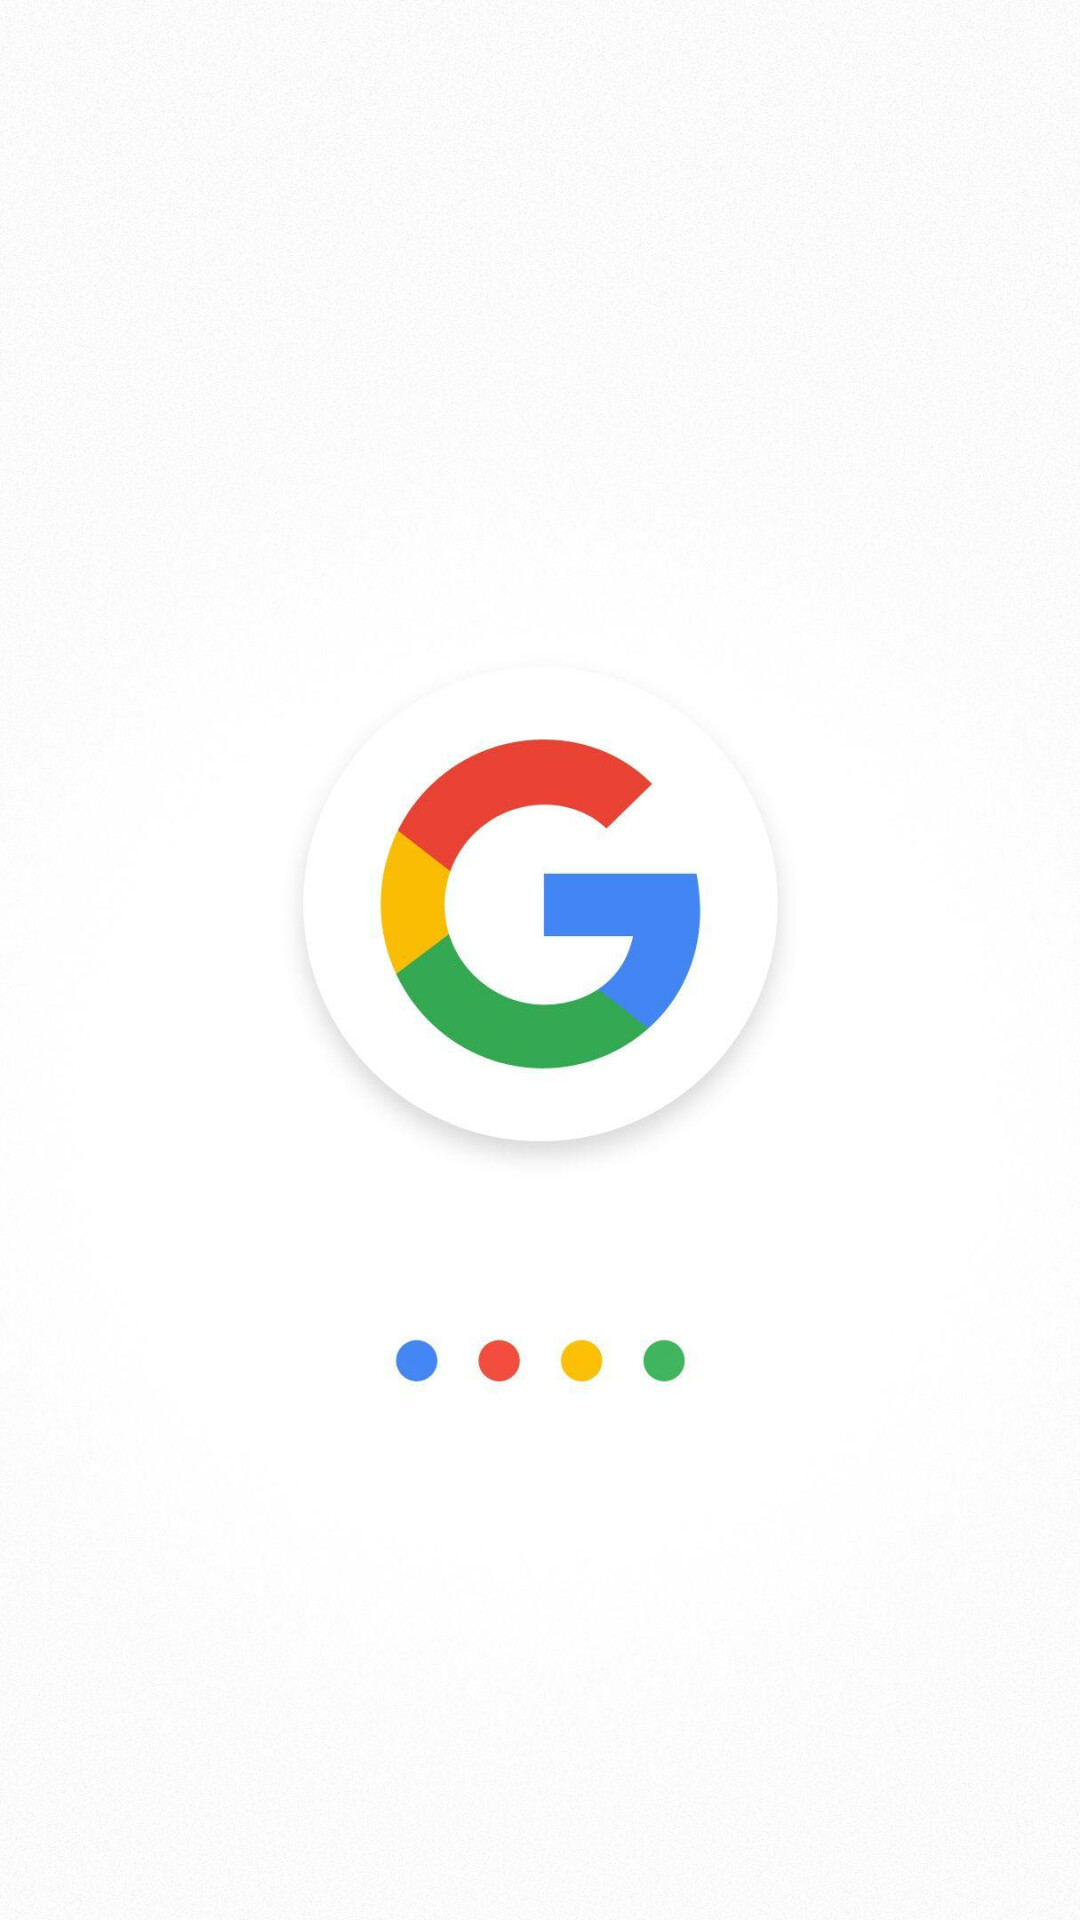 Google: Began in January 1996 as a research project by Larry Page and Sergey Brin. 1080x1920 Full HD Wallpaper.